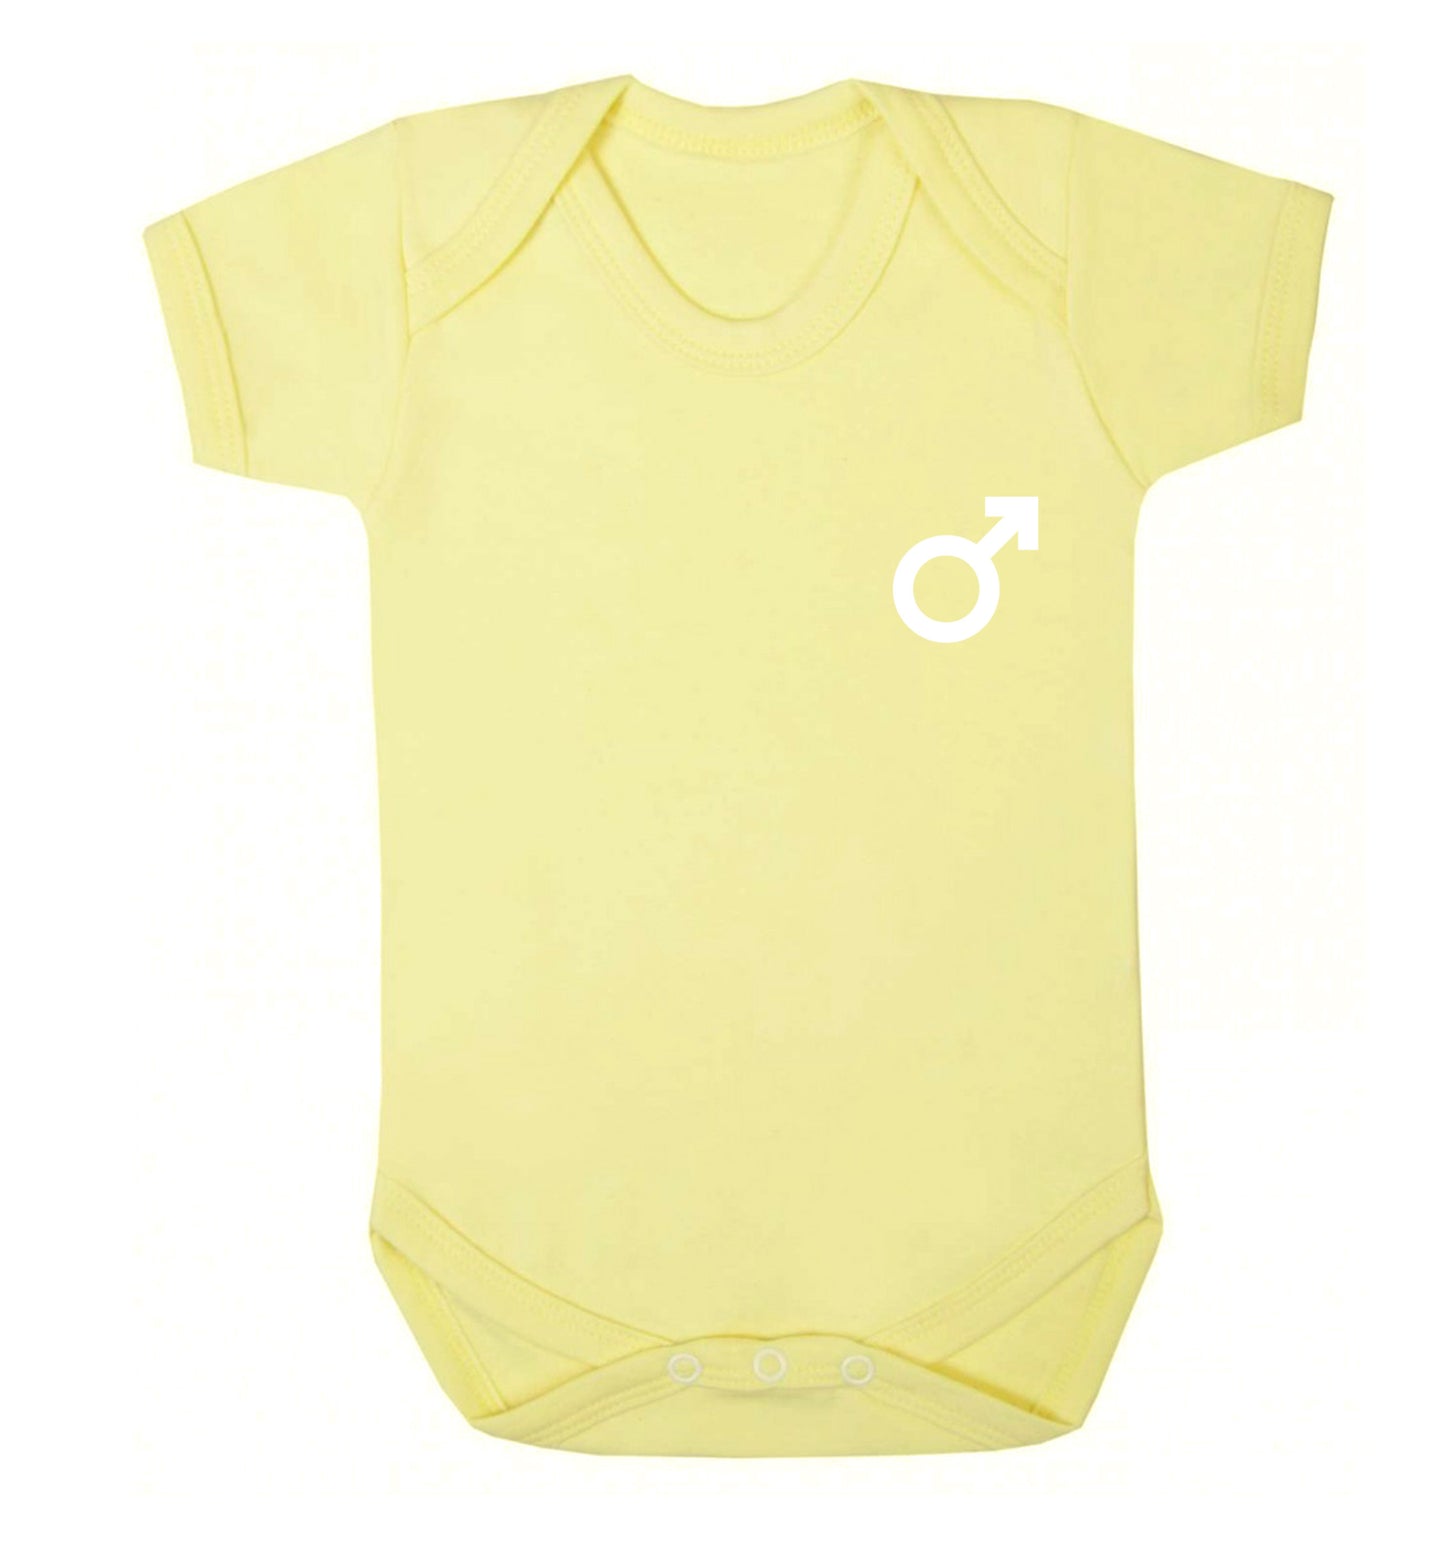 Male symbol pocket Baby Vest pale yellow 18-24 months